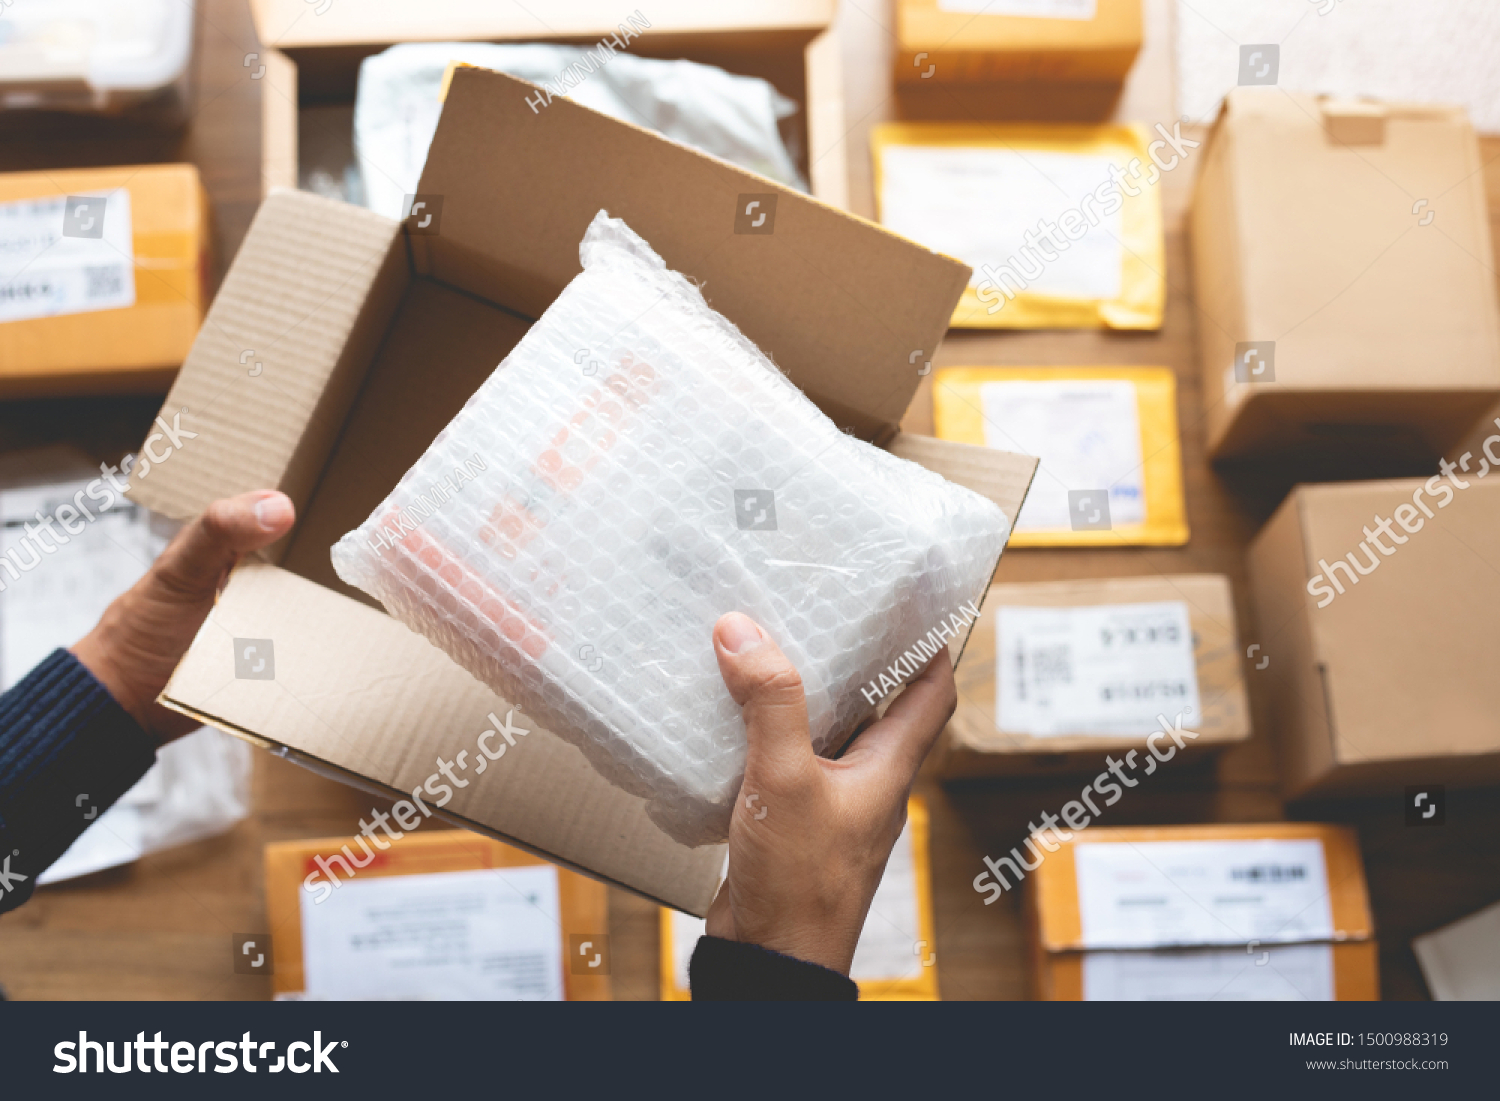 Online shopping concepts with male hand packing some product to brown box on another packet for shipping to customer.Ecommerce,delivery and logistic network.Business retail market #1500988319